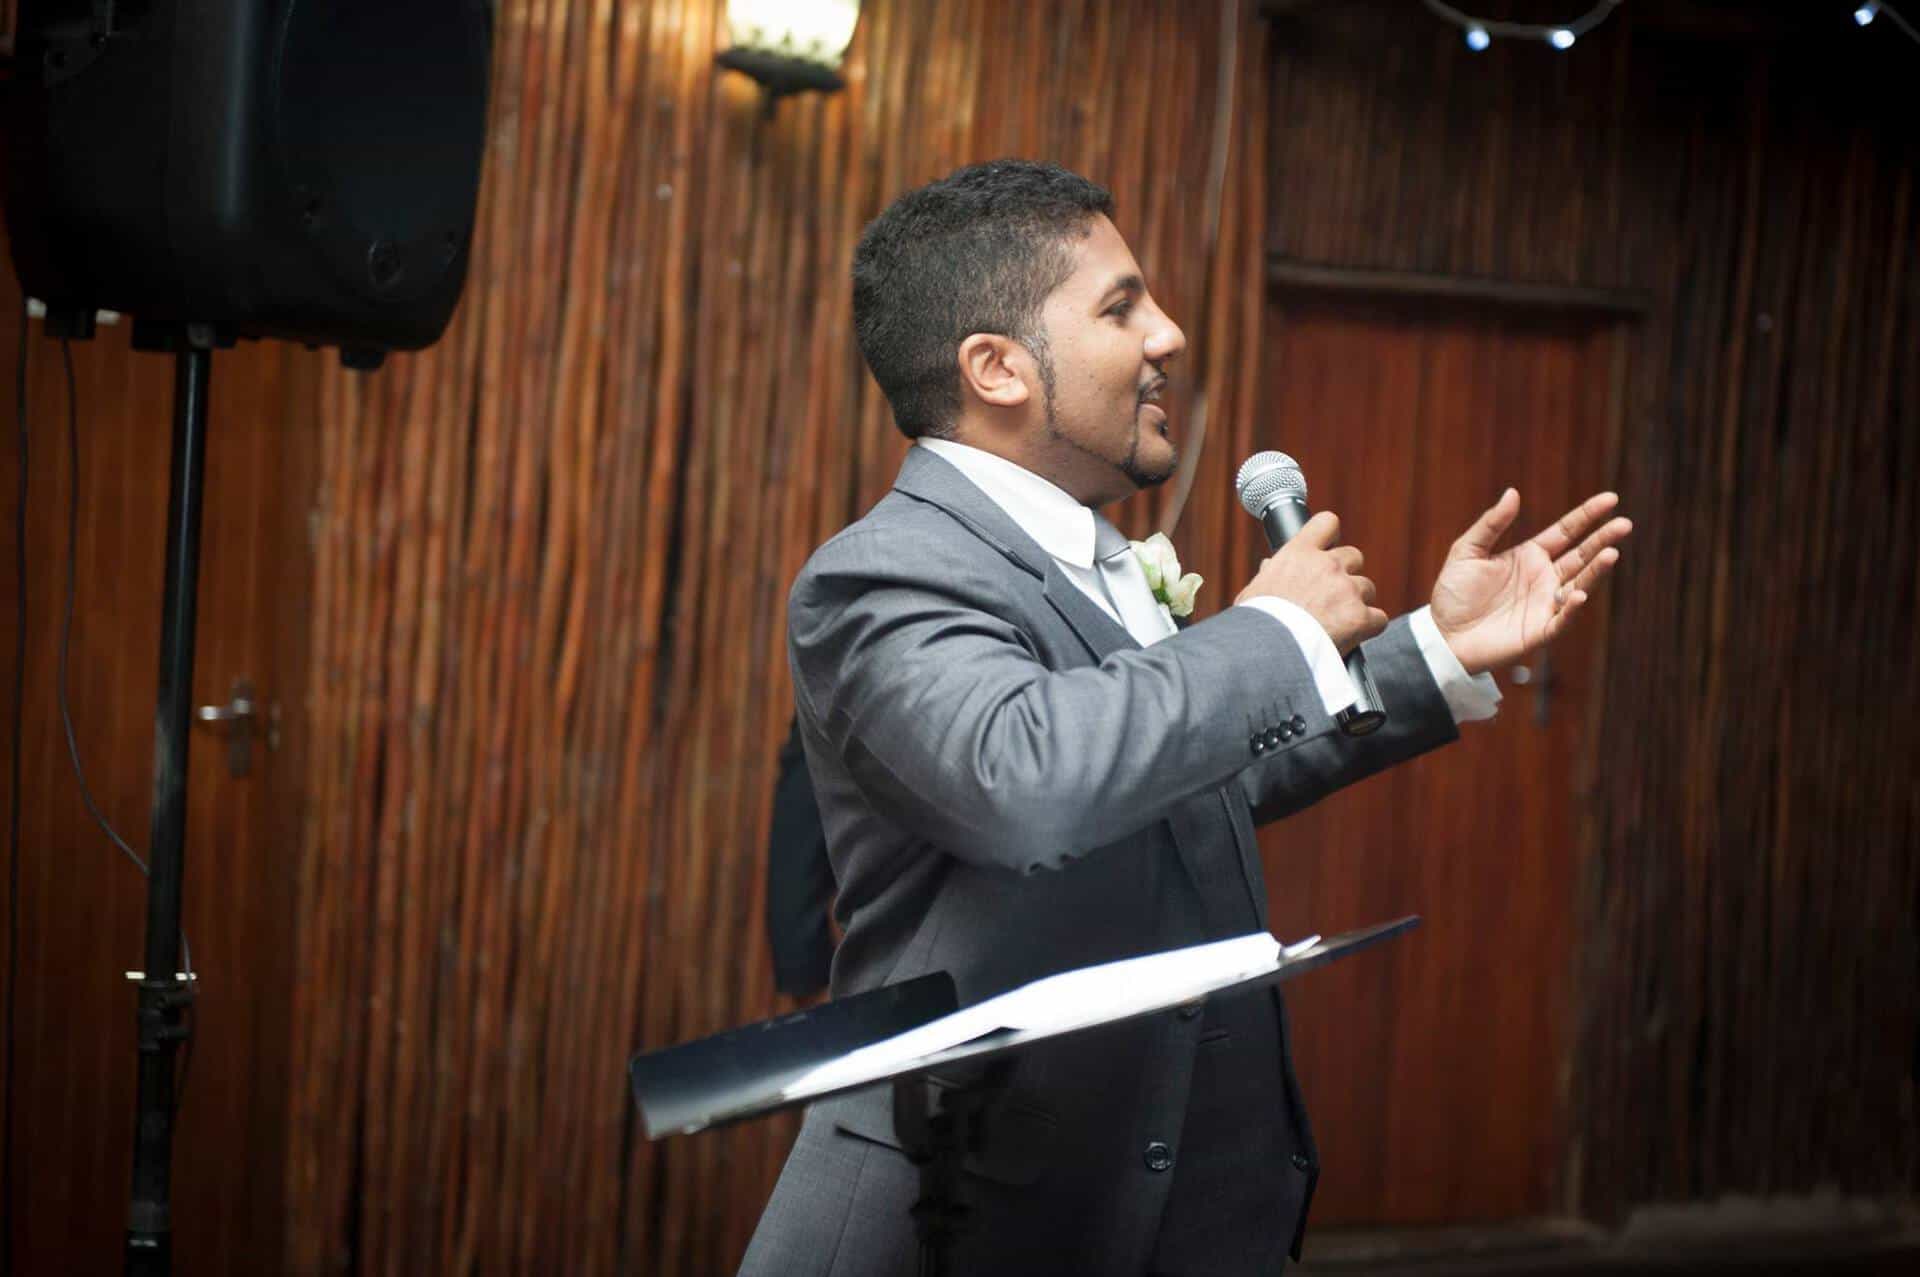 Muneer speaking at an event